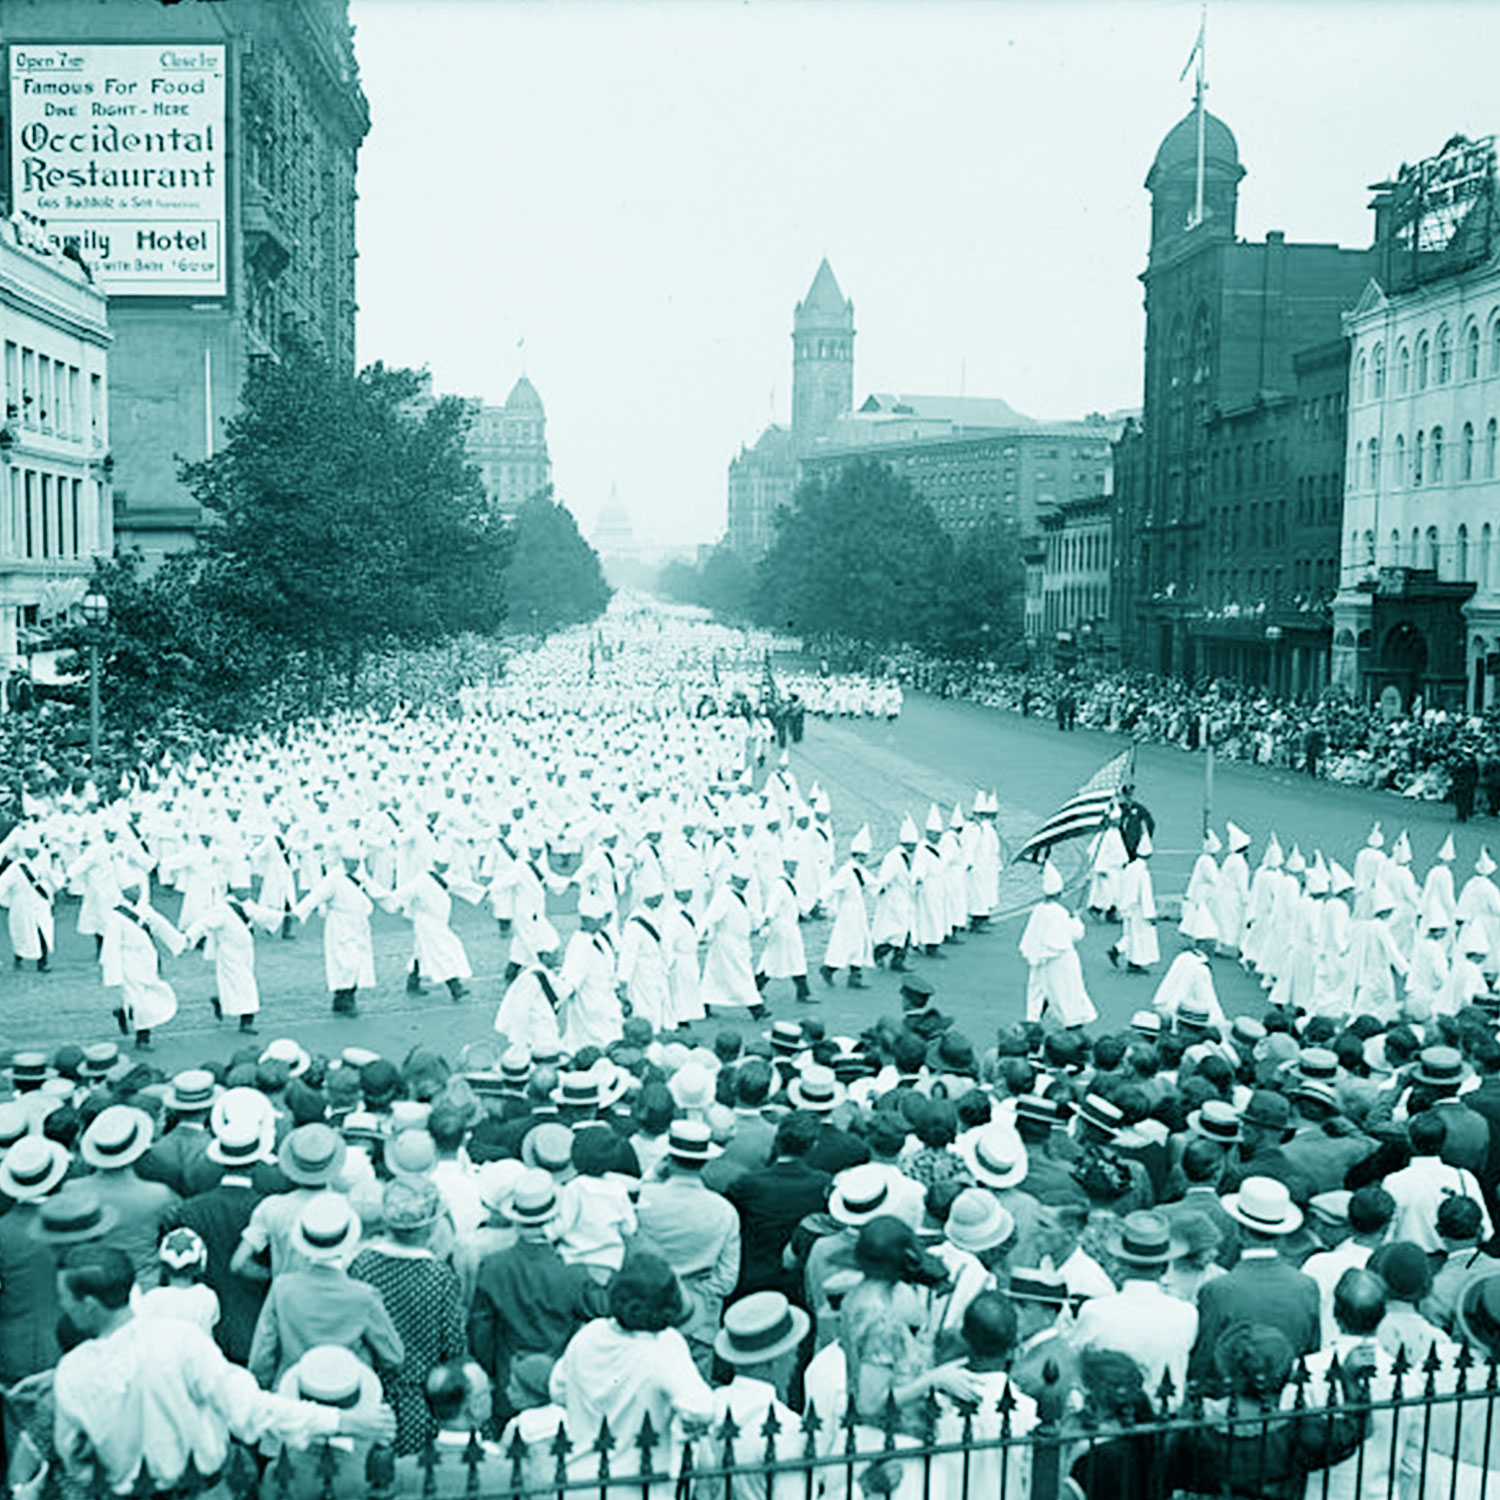 The day the nation's capital welcomed the KKK